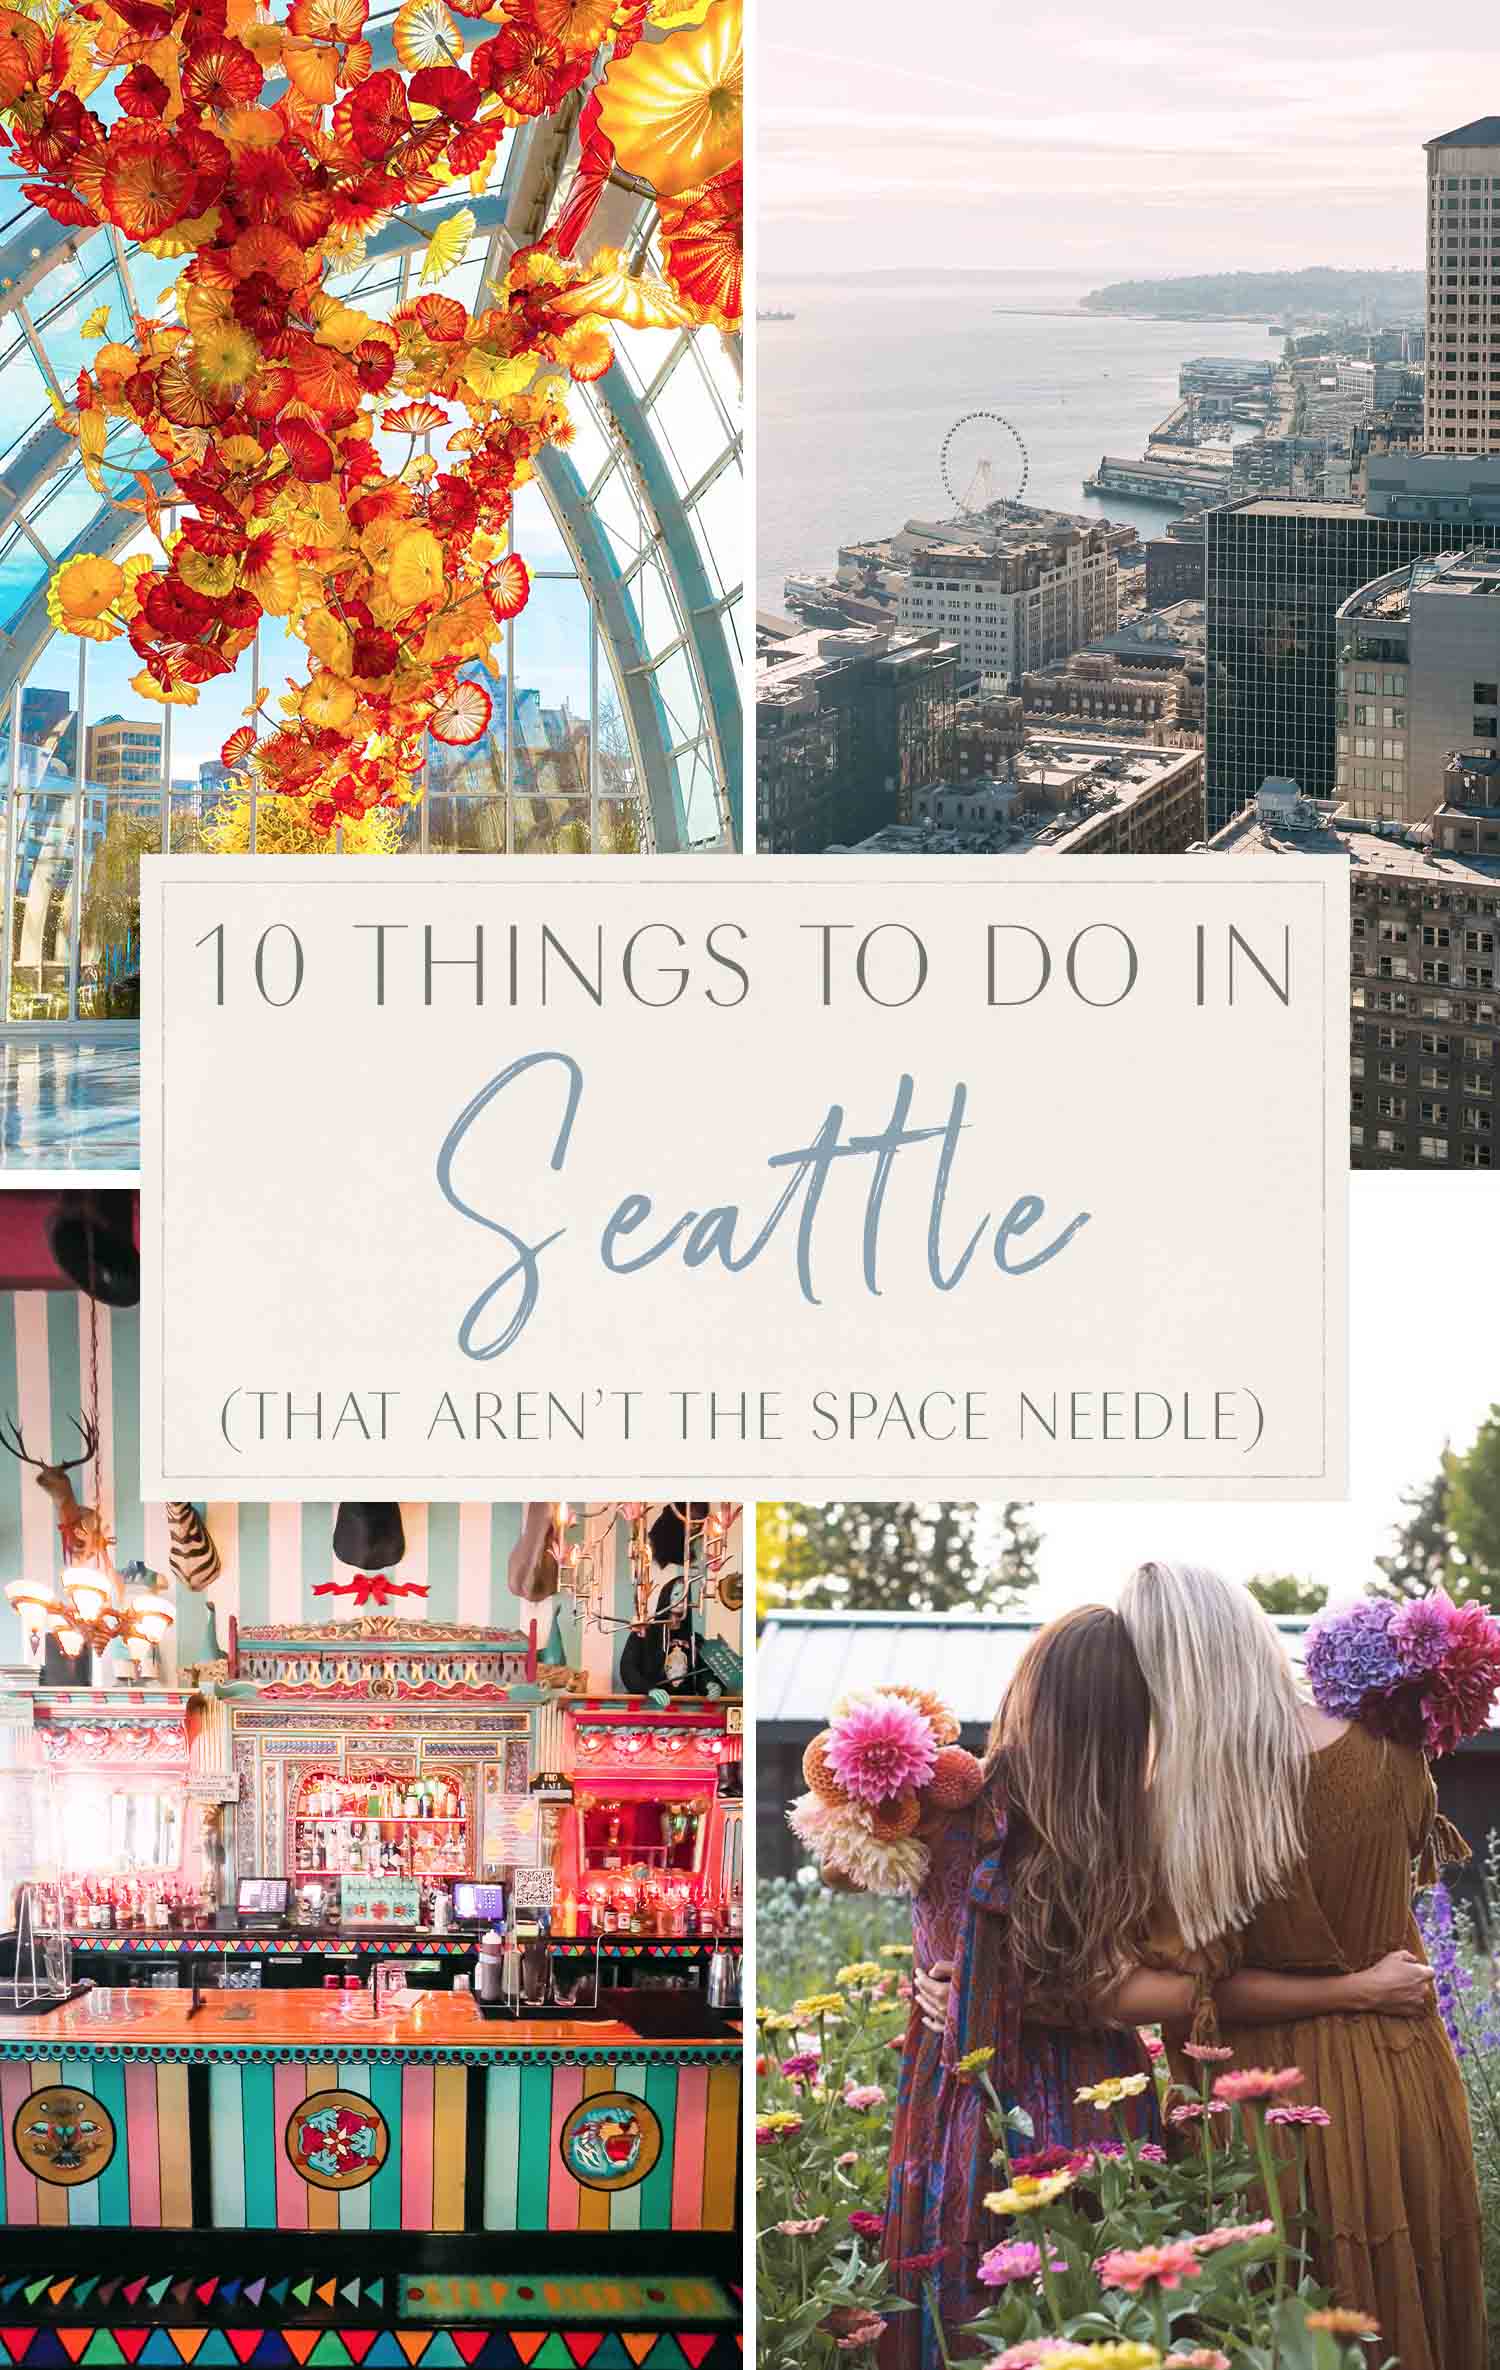 Things to do in seattle not space needle